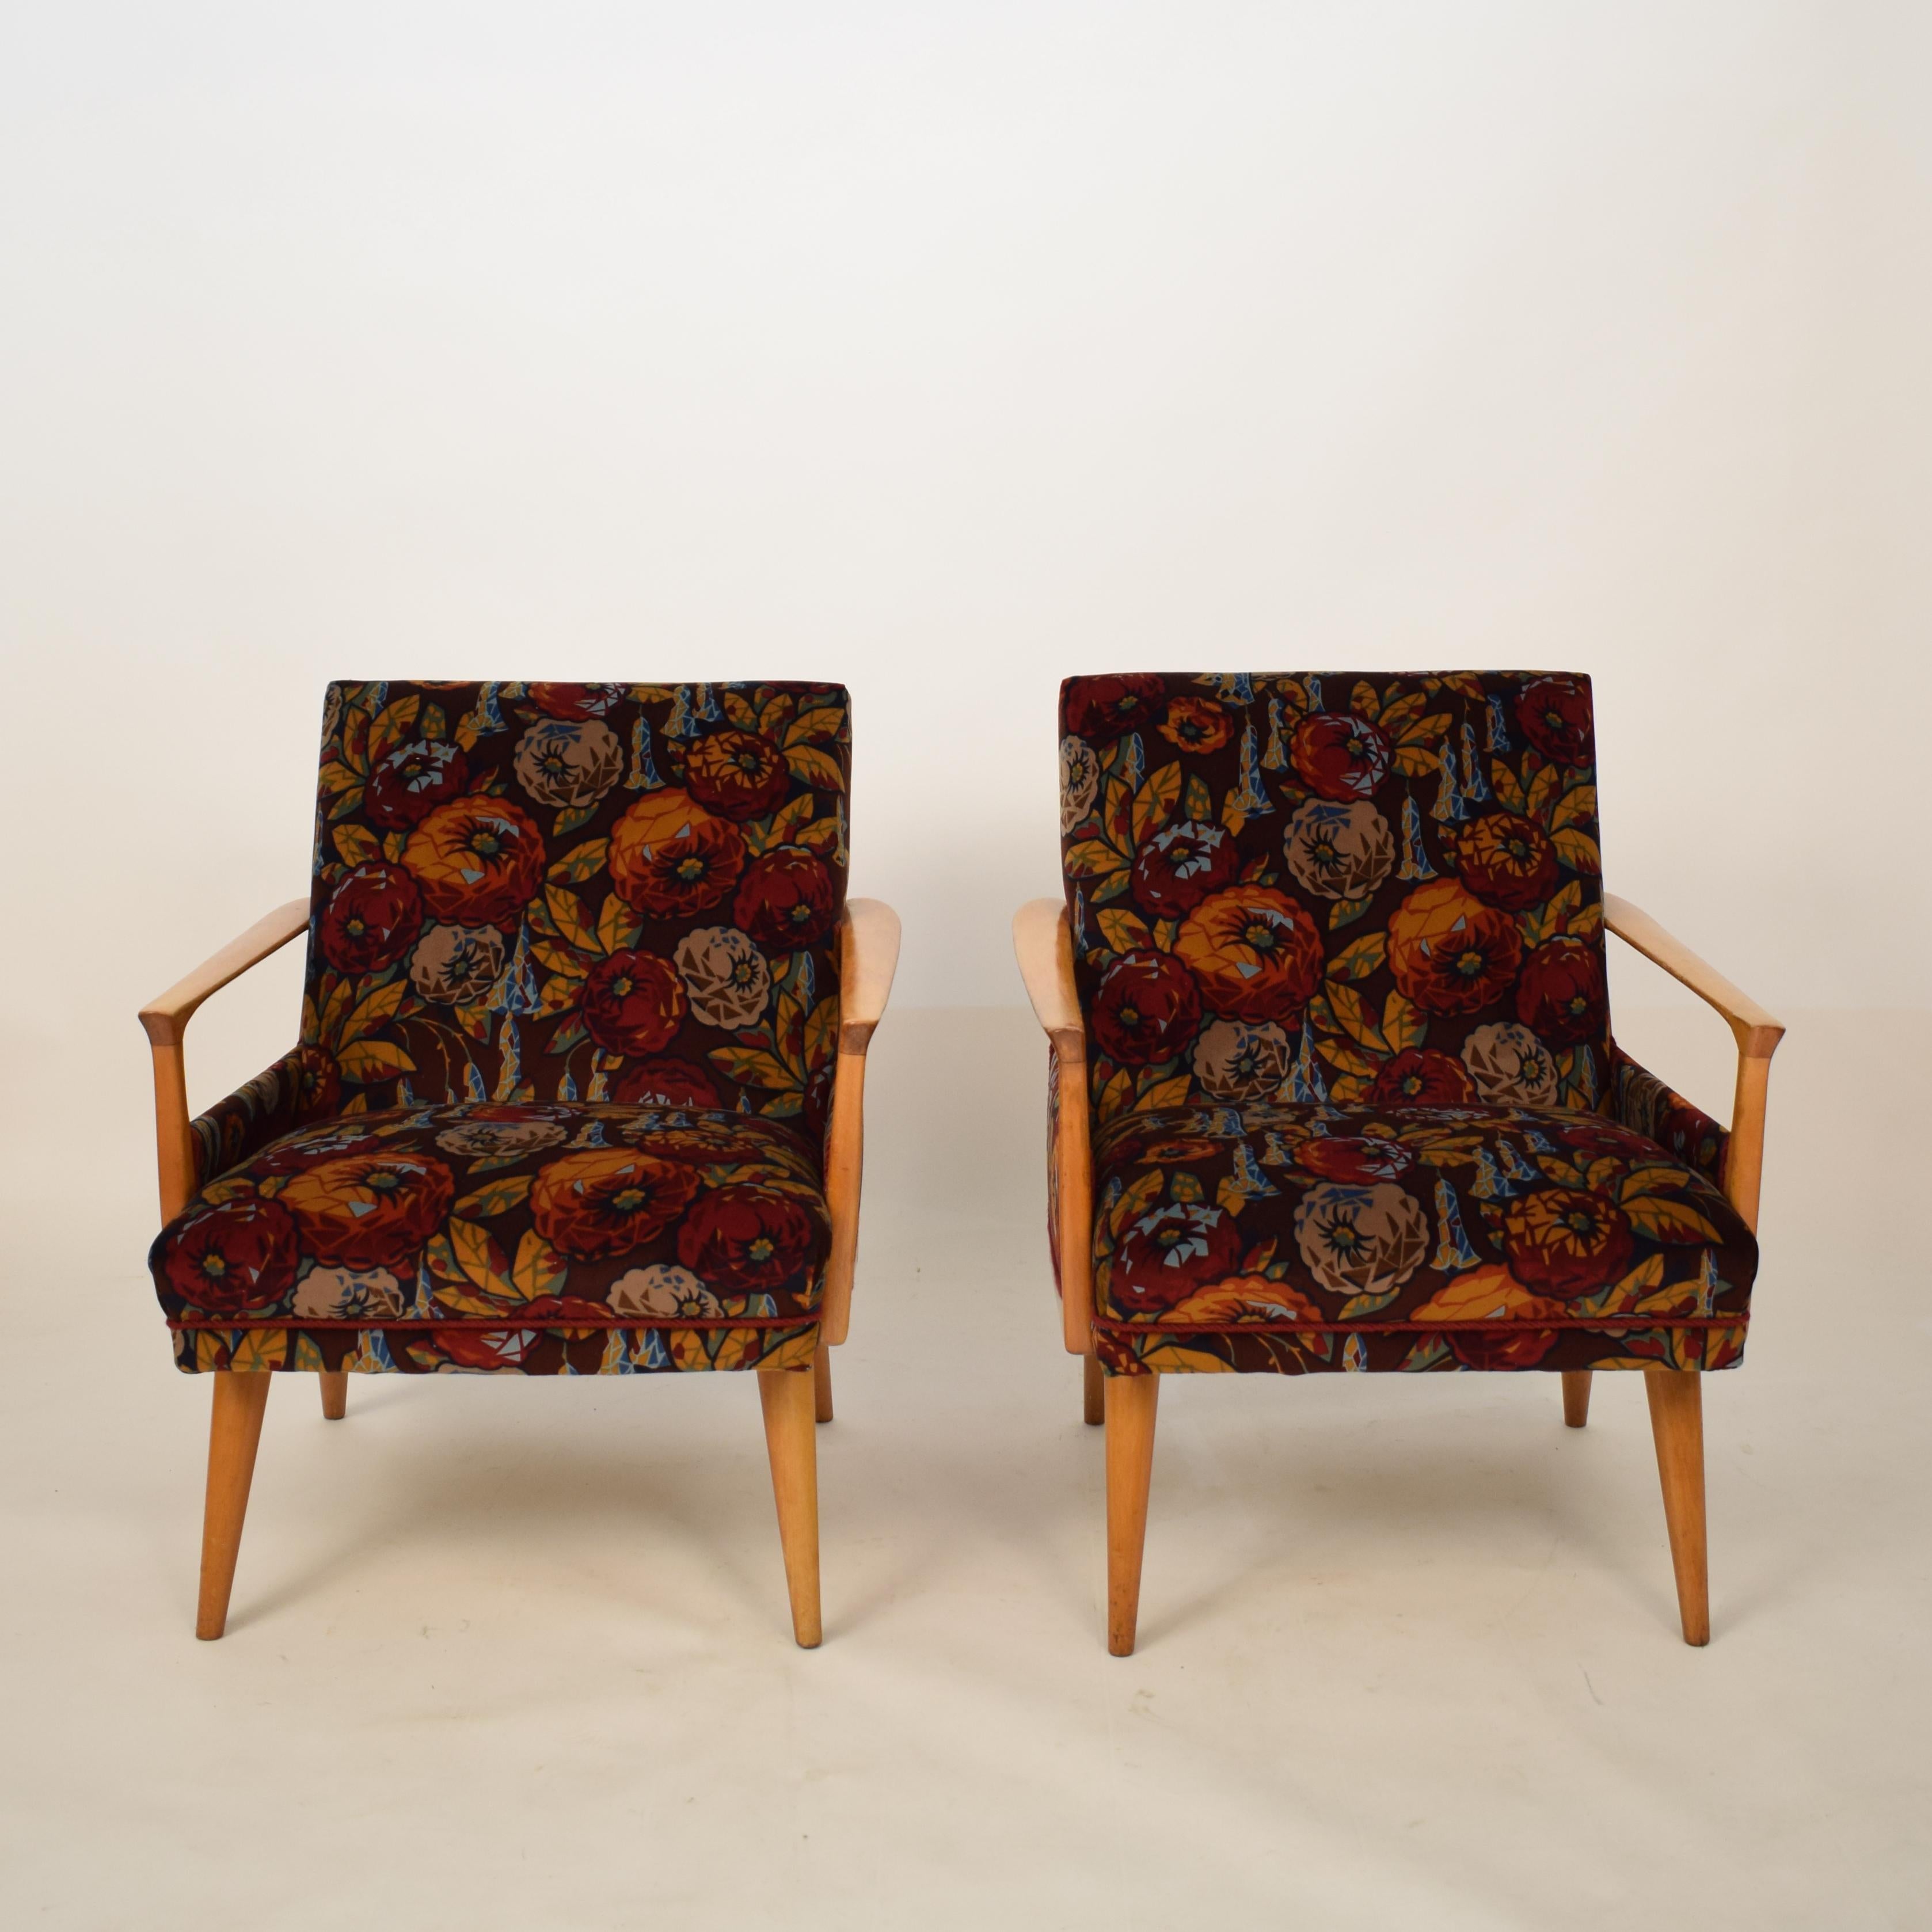 This elegant pair of midcentury armchairs were made in the 1950s in Italy.
The are made out of beech and new upholstered in a multicolored flower velvet. The fabric is designed by Helge Stüssel and produced by Ratti in Italy.
They are very